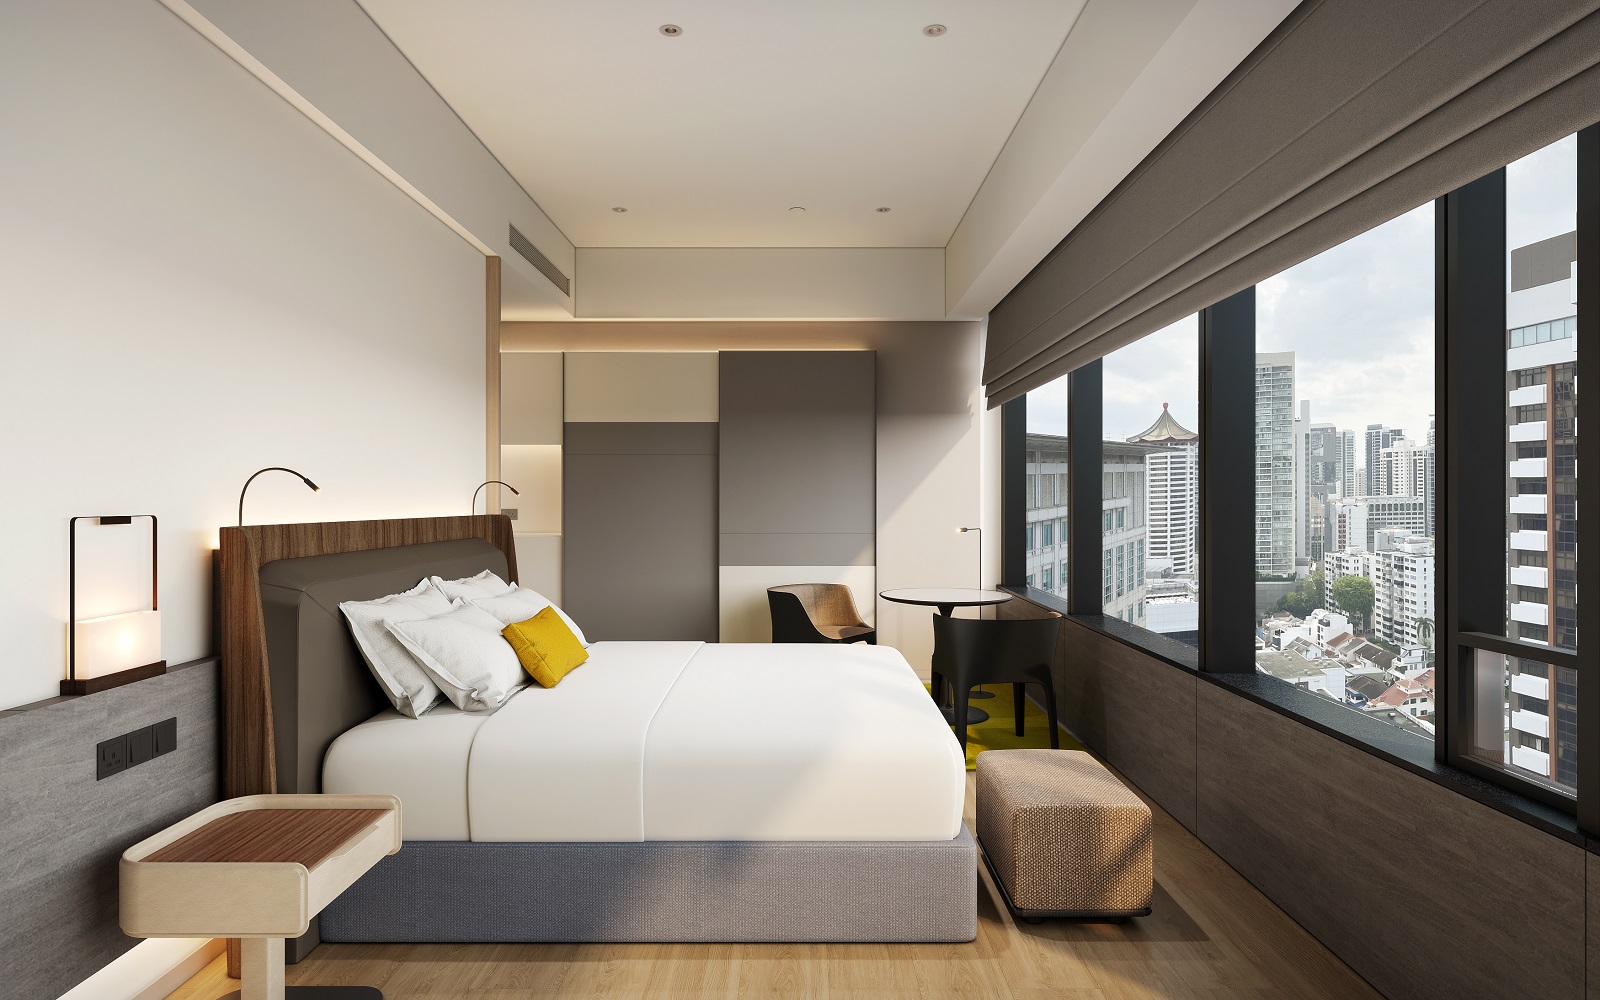 COMO Metropolitan Singapore hotel guestroom in grey and white with a yellow pillow on the bed and views across Singapore